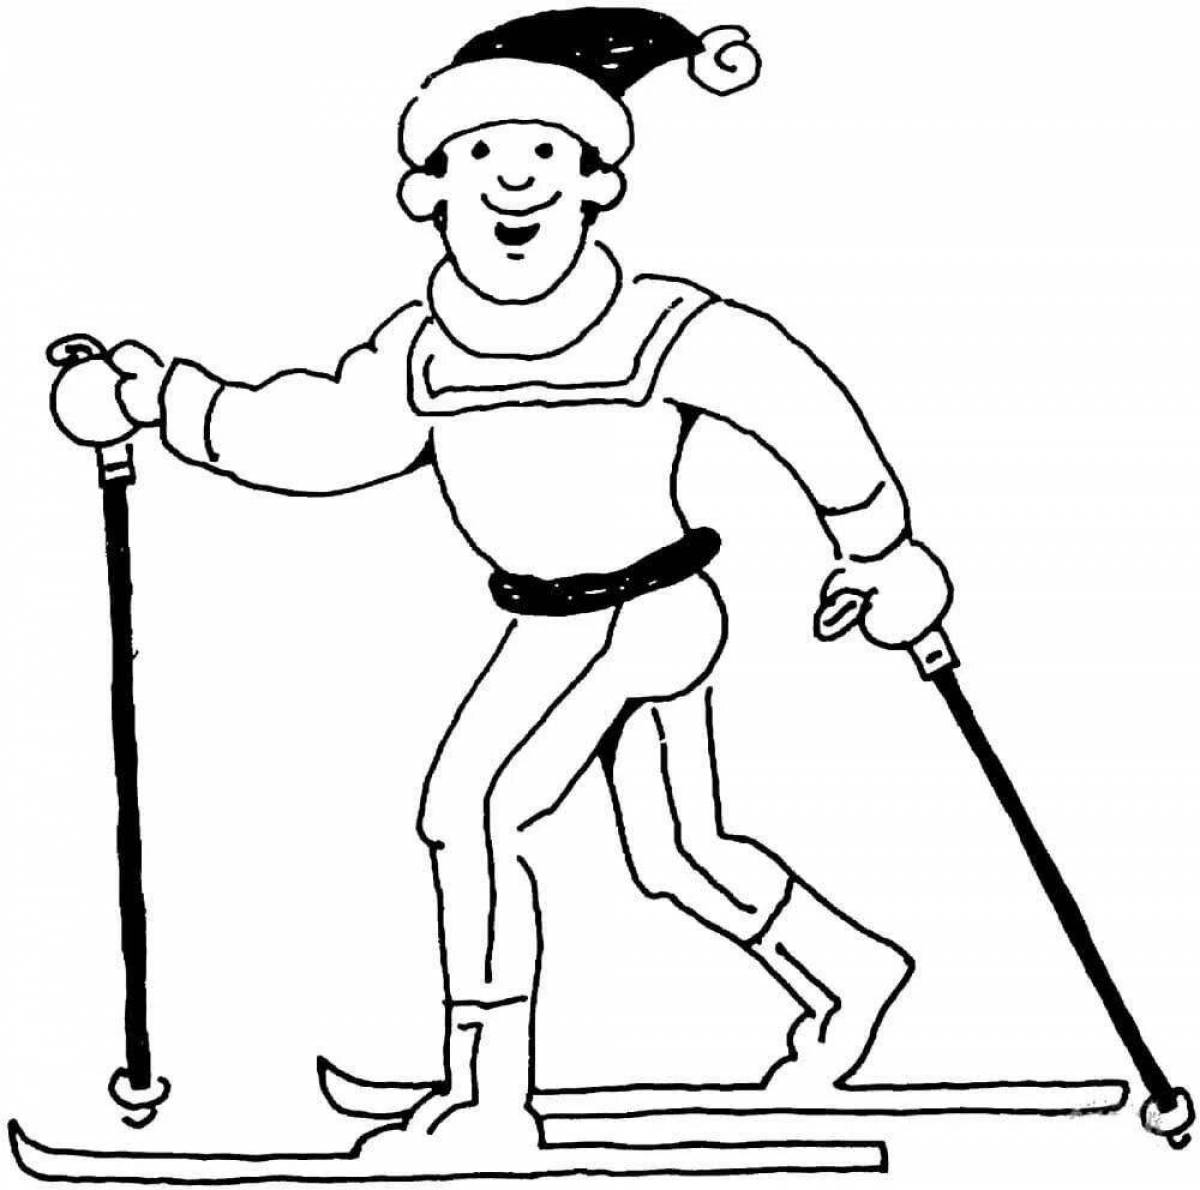 Coloring page attractive ski race